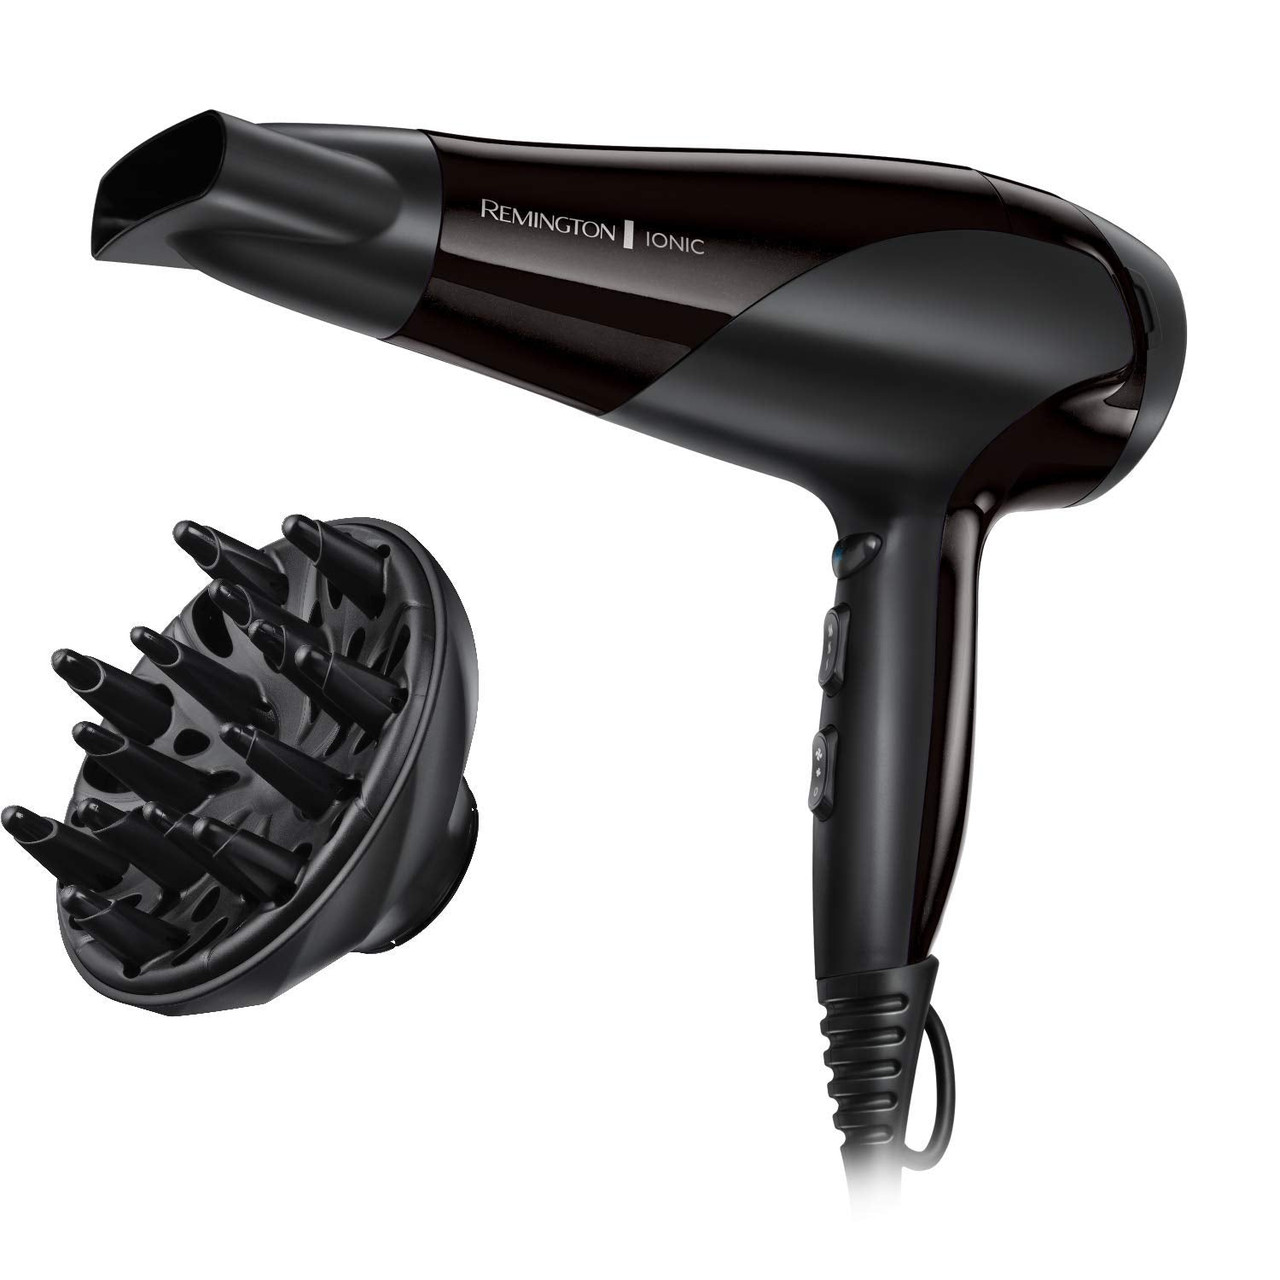 Buy Universal Collapsible Hair Dryer Diffuser Attachment Salon Grade  toolLightweight Foldable Portable Travel Folding Design Fit Most of blow  DryersBlack Online at Low Prices in India  Amazonin